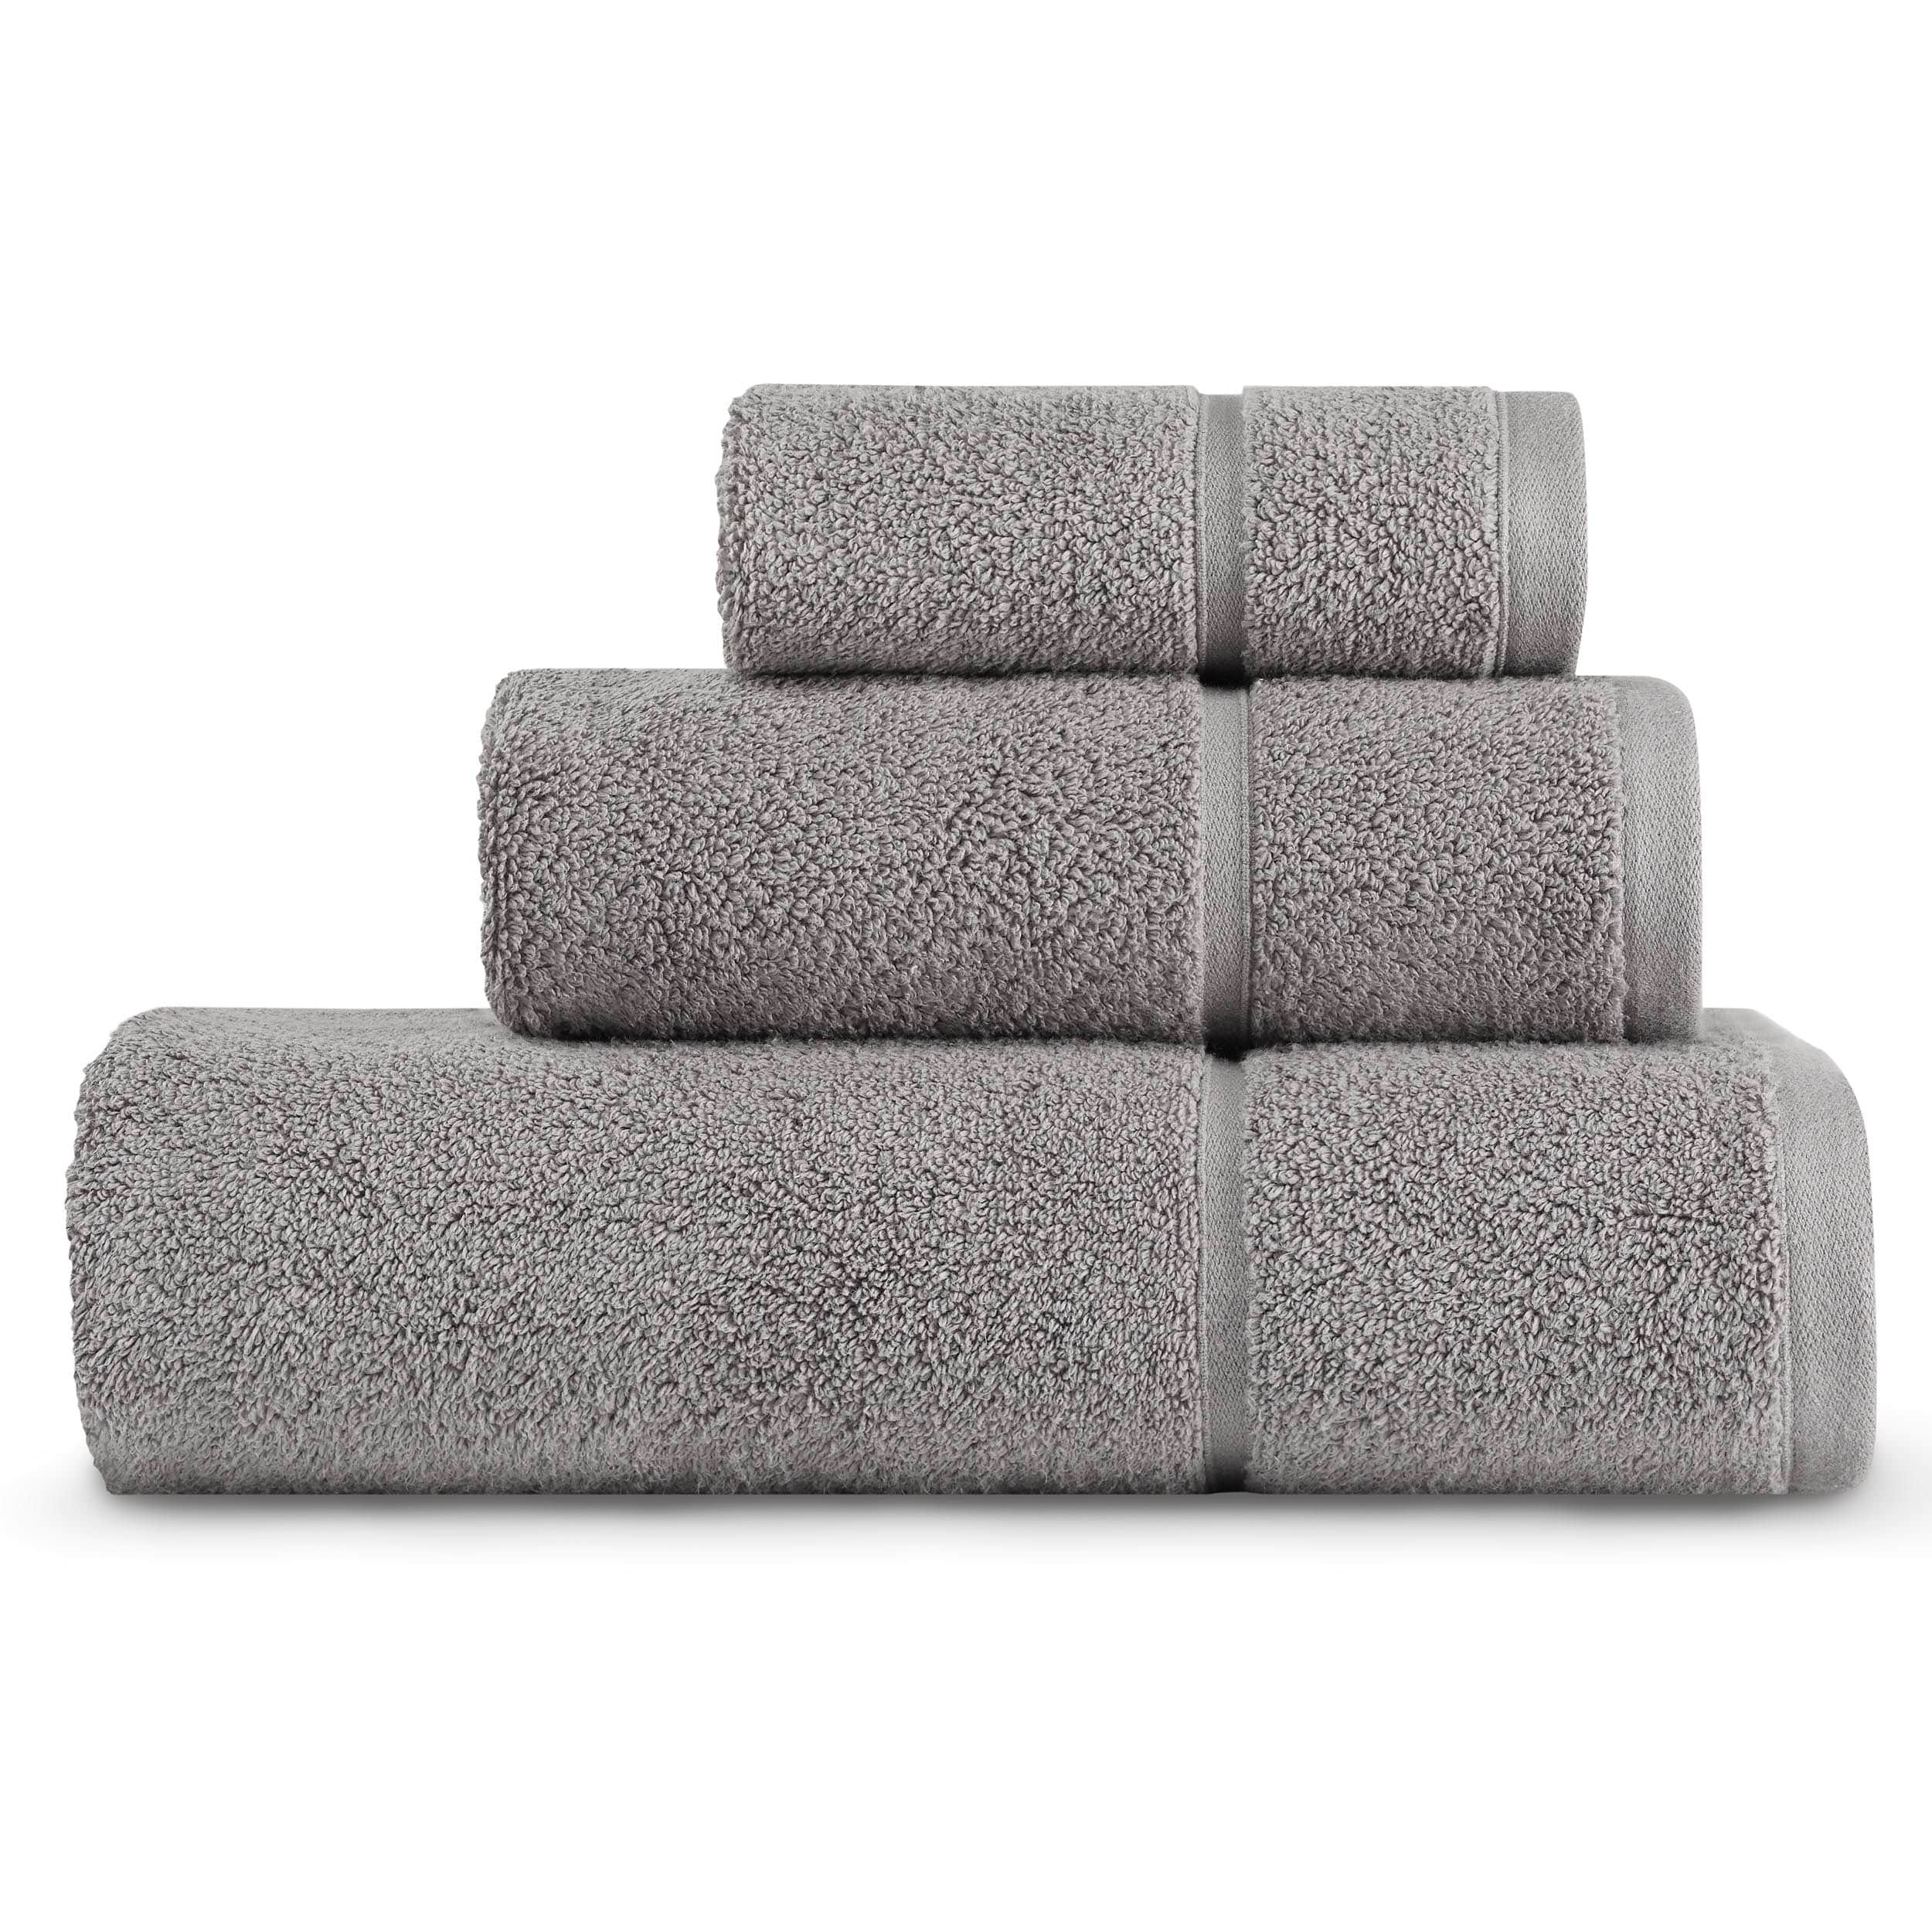 Vera Wang Sculpted Pleat Solid Cotton 6-Piece Towel Set in Light Grey